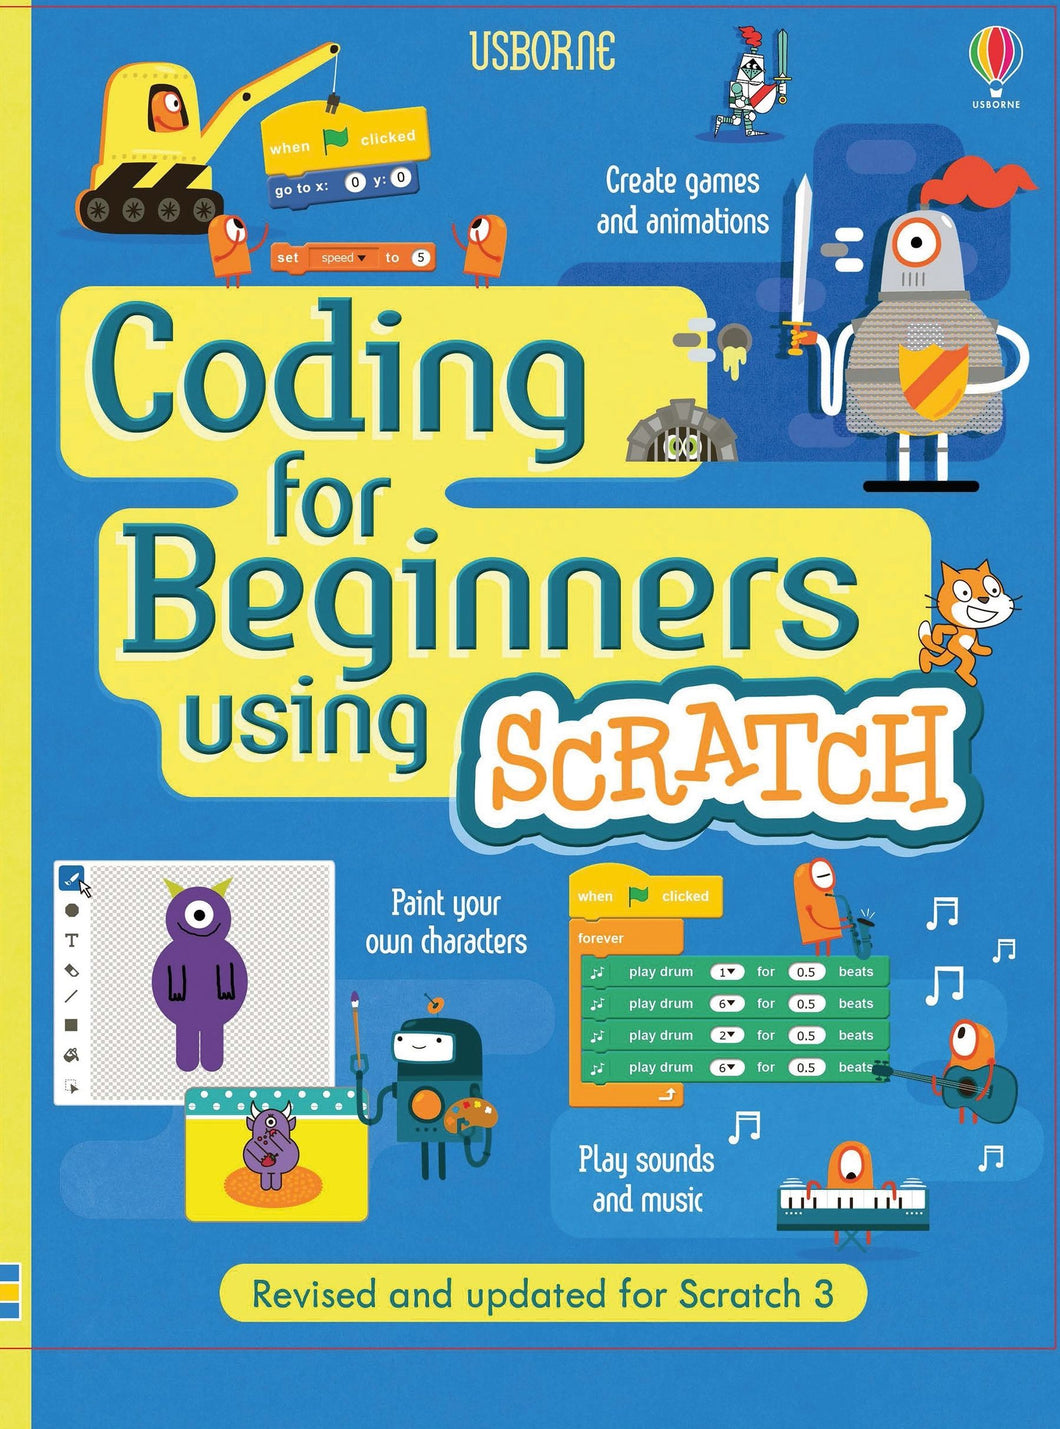 Blue cover with yellow spine. Cartoon illustrations on the cover show different things you can do with coding: 'play sounds and music, paint your own characters, create games and animations.' Near the base, the cover reads 'revised and updated for Scratch 3'.